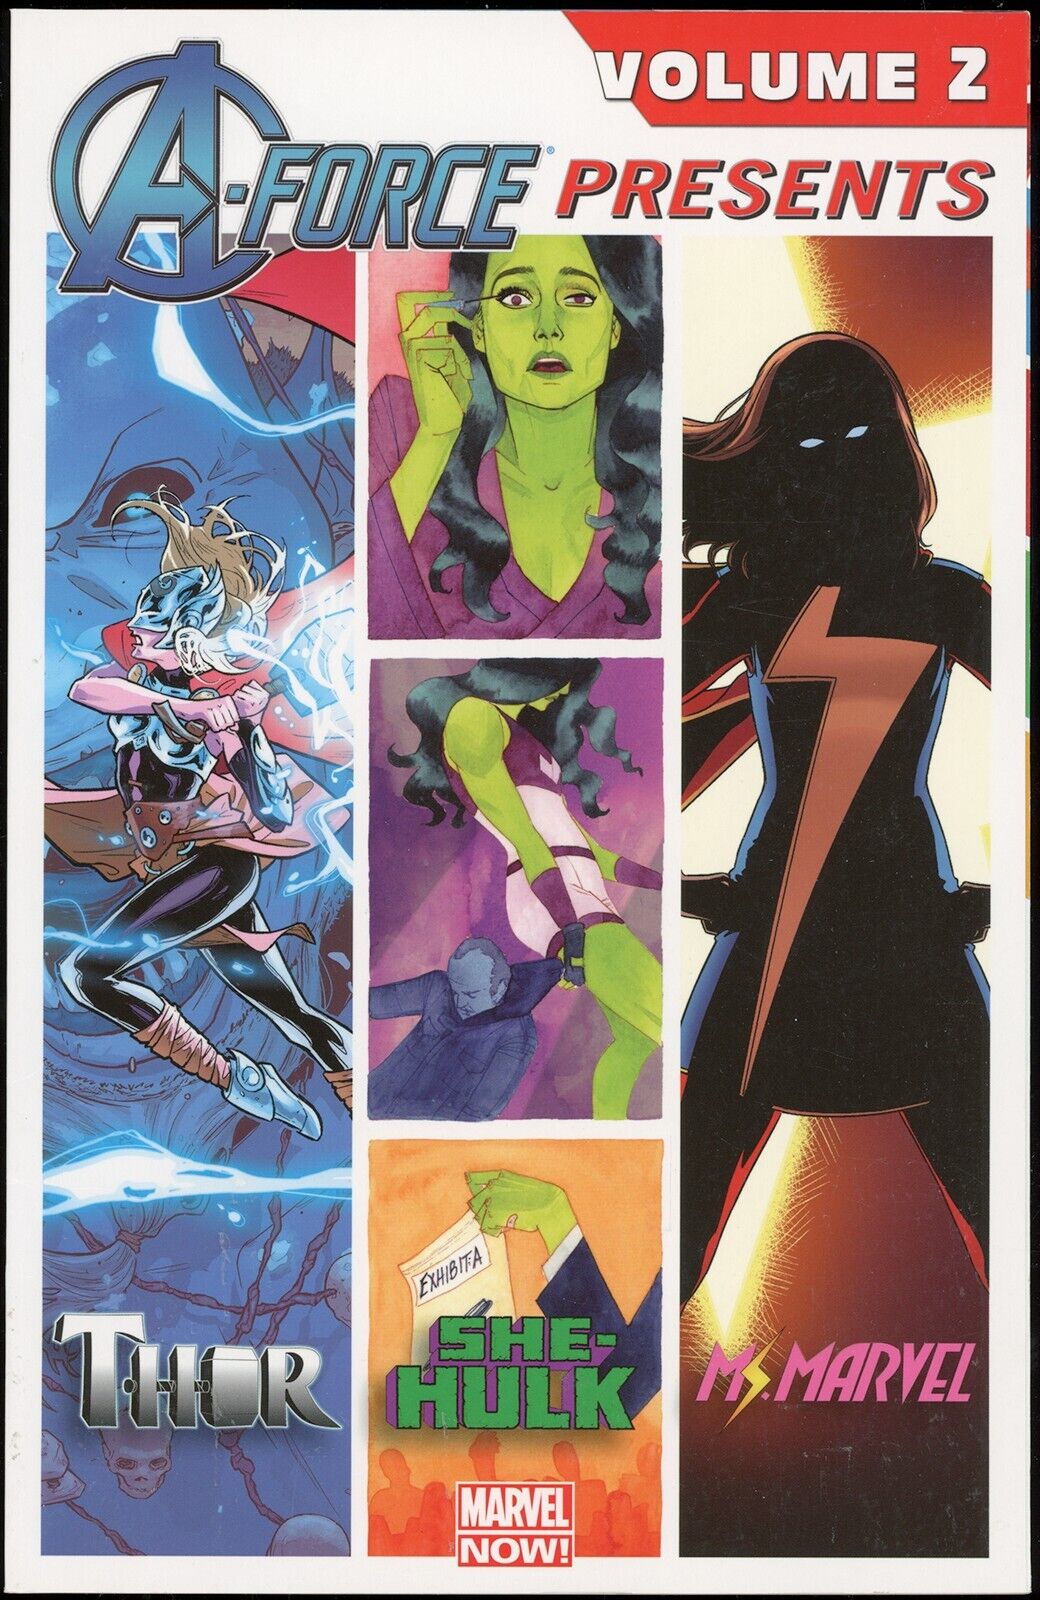 A-Force Presents Volume 2 Trade Paperback TPB - Vol. Two